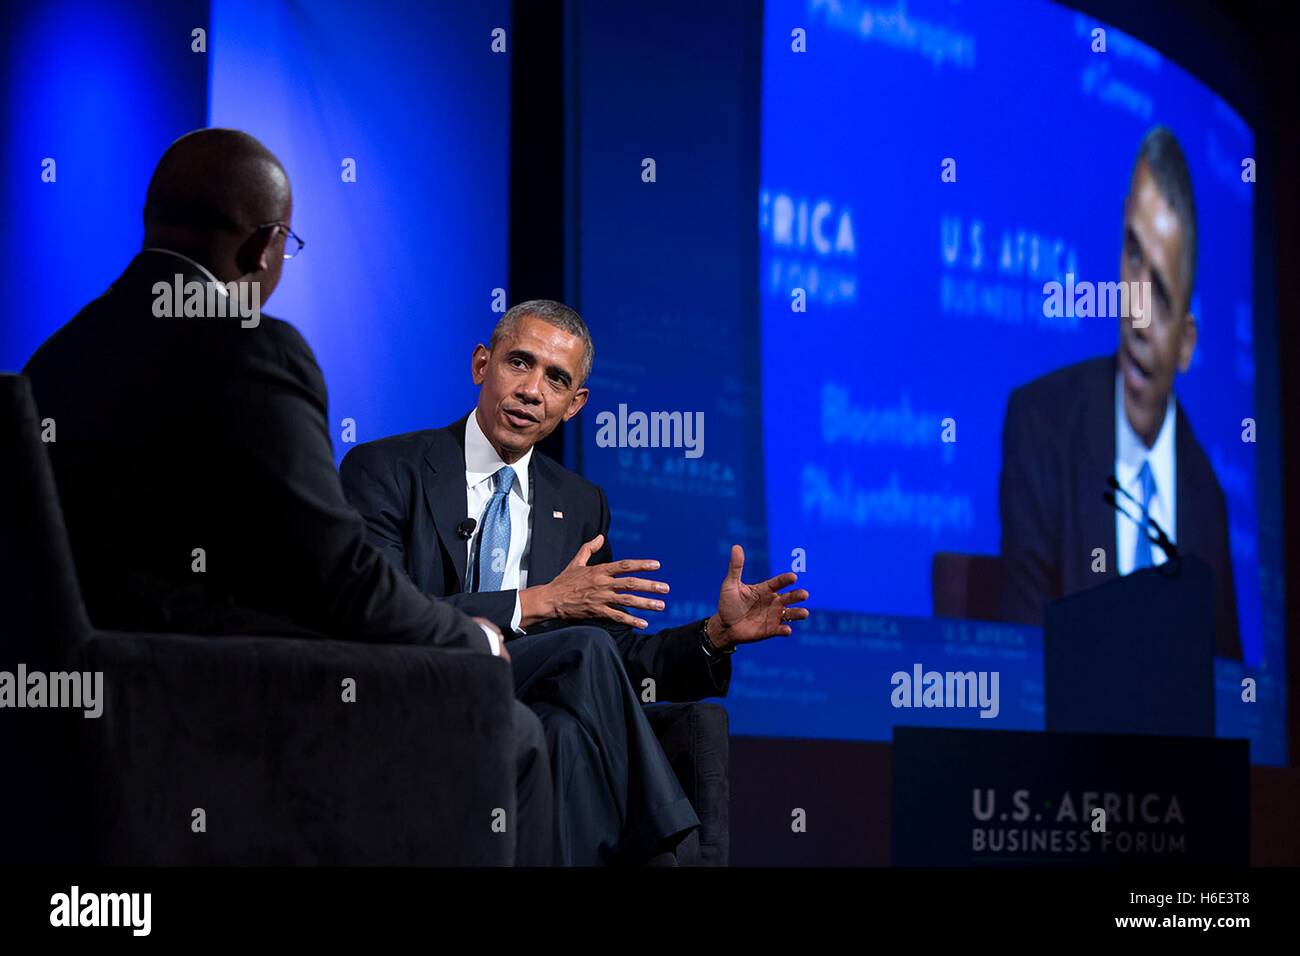 U.S. President Barack Obama participates in a discussion at the U.S.-Africa Business Forum August 5, 2014 in Washington, DC. Stock Photo